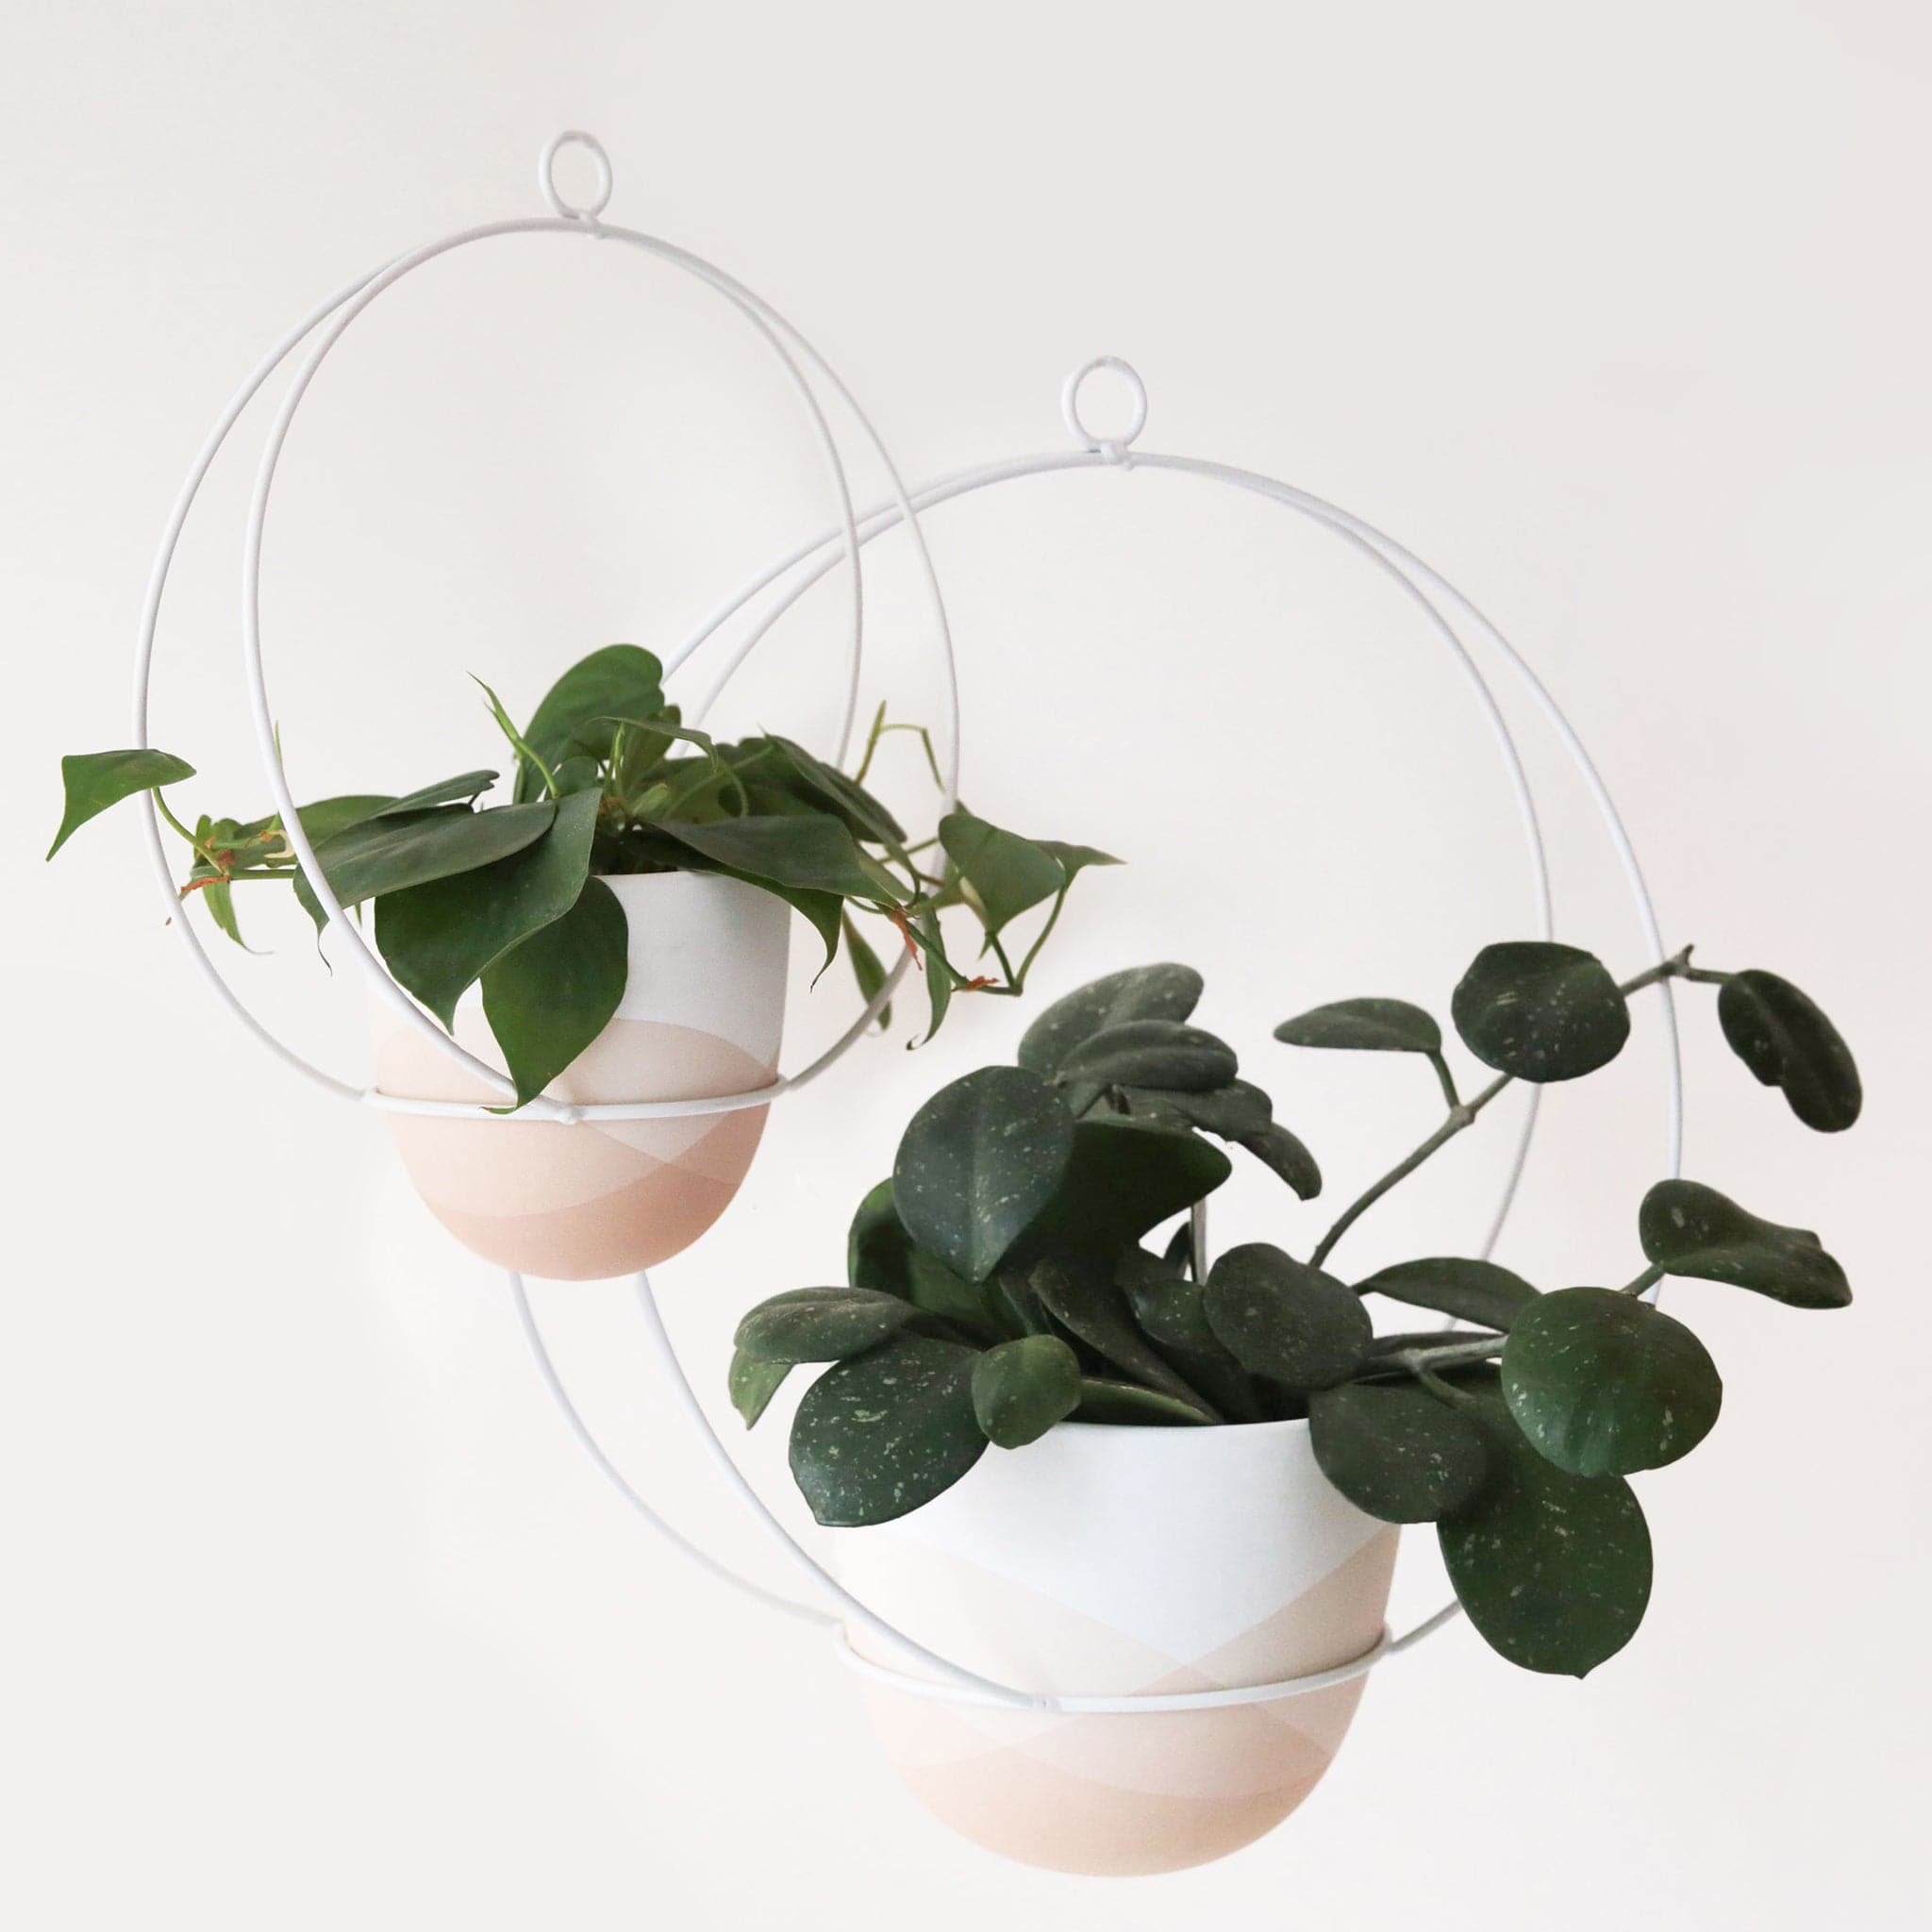 The simple silhouette of the Cloud Hanging Planter combines a stylish ombre finished pot with a white metal hanger to make a stunning backdrop for all your hanging plants.